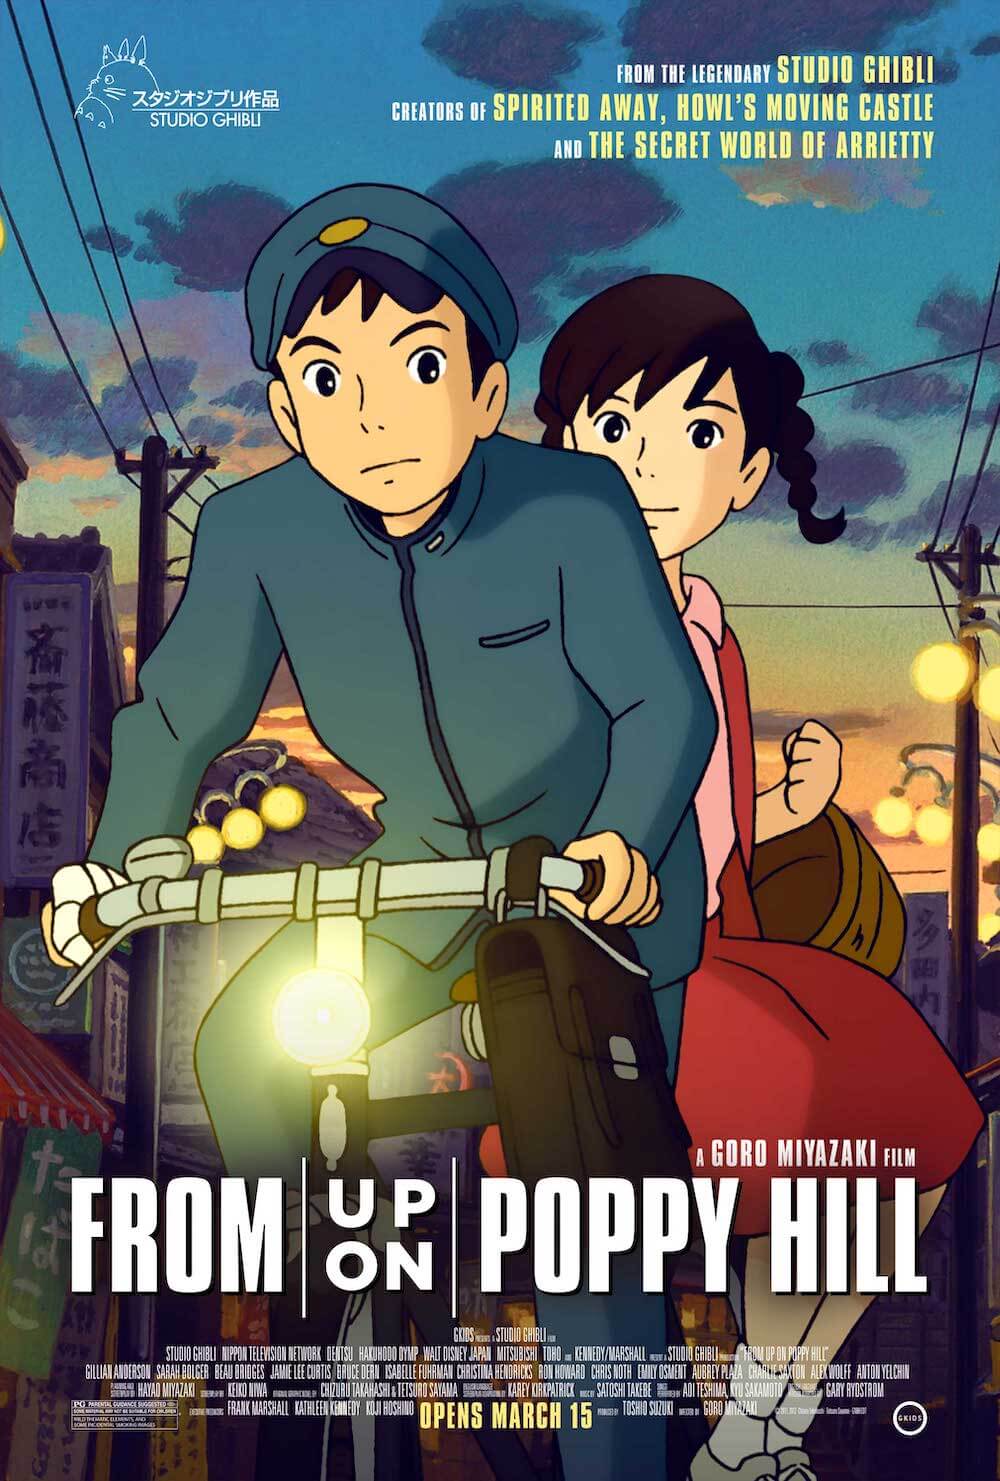 From Up On Poppy Hill is one of the best rated G movies for 9 year olds on Netflix.